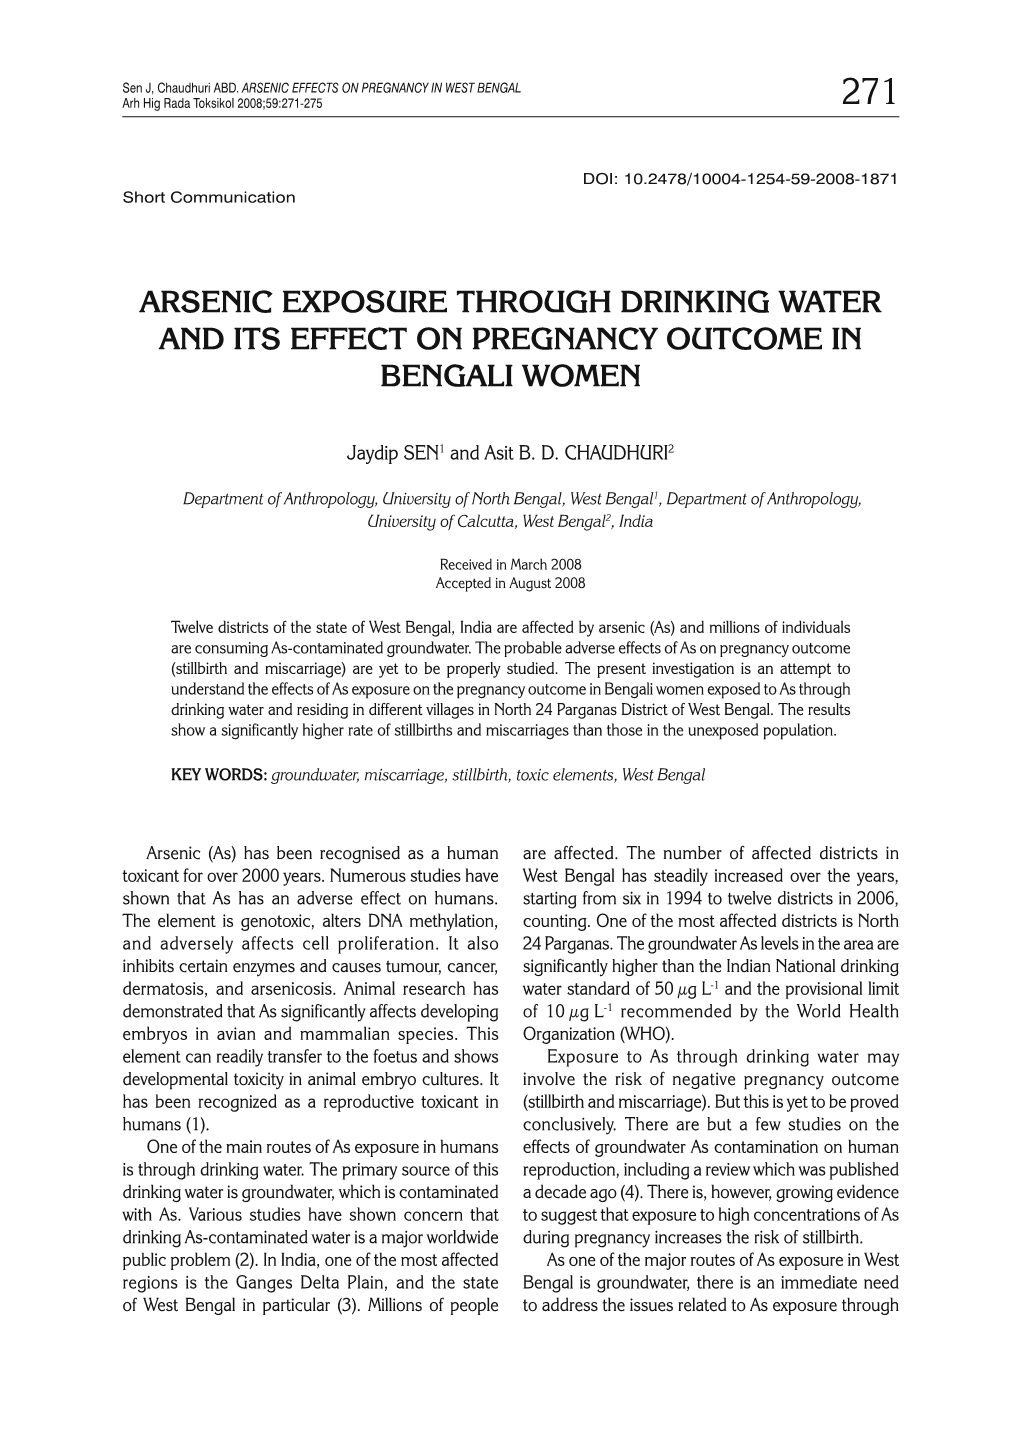 Arsenic Exposure Through Drinking Water and Its Effect on Pregnancy Outcome in Bengali Women